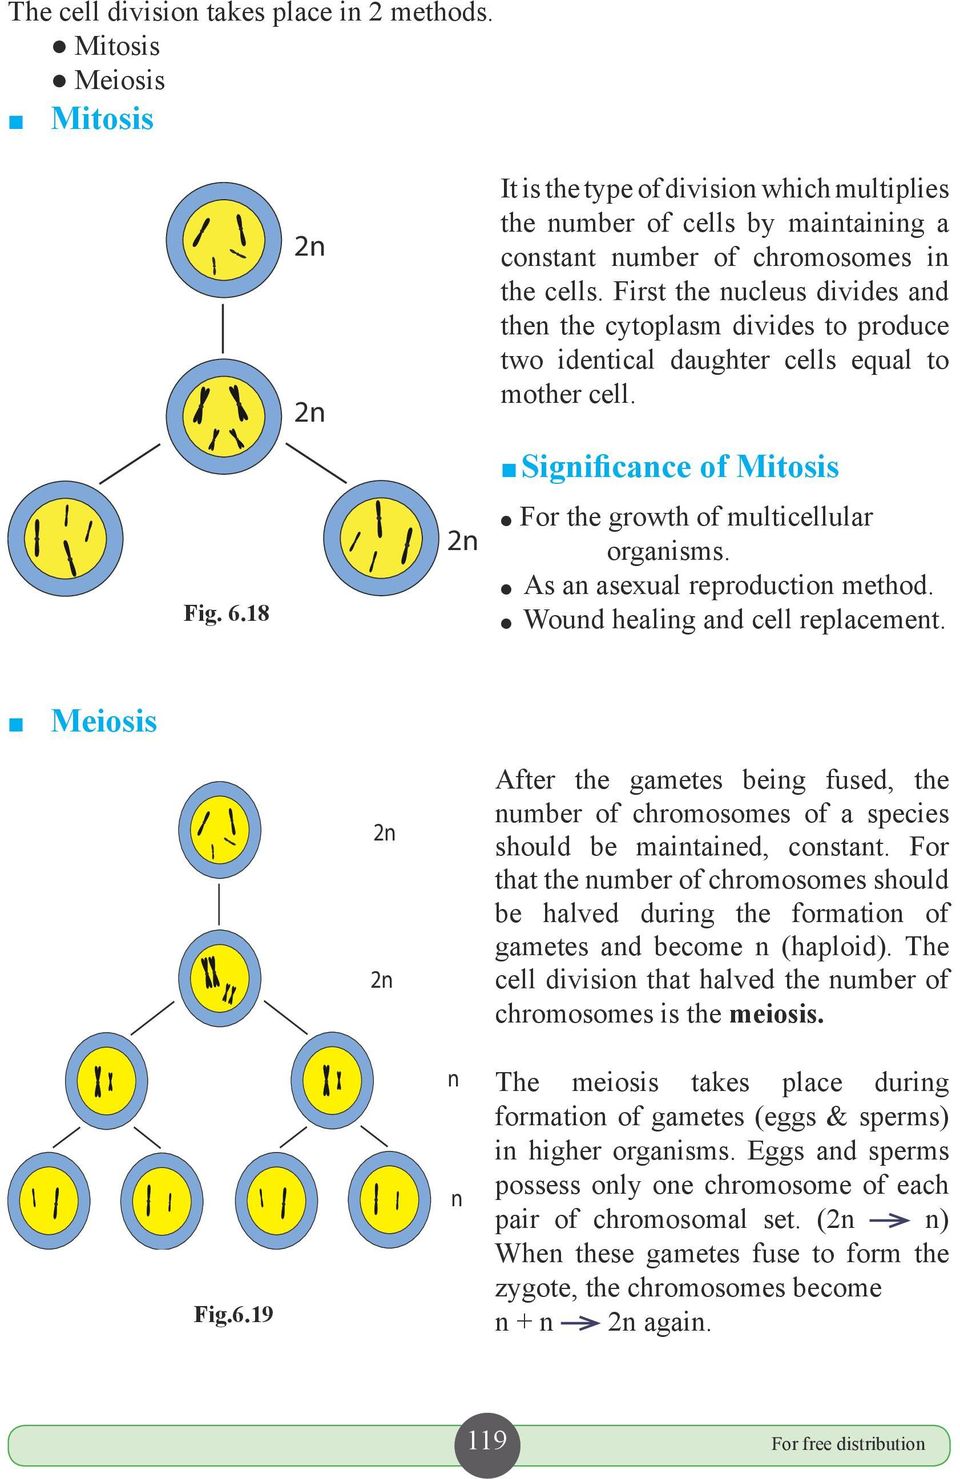 First the nucleus divides and then the cytoplasm divides to produce two identical daughter cells equal to mother cell. Significance of Mitosis ² For the growth of multicellular organisms.